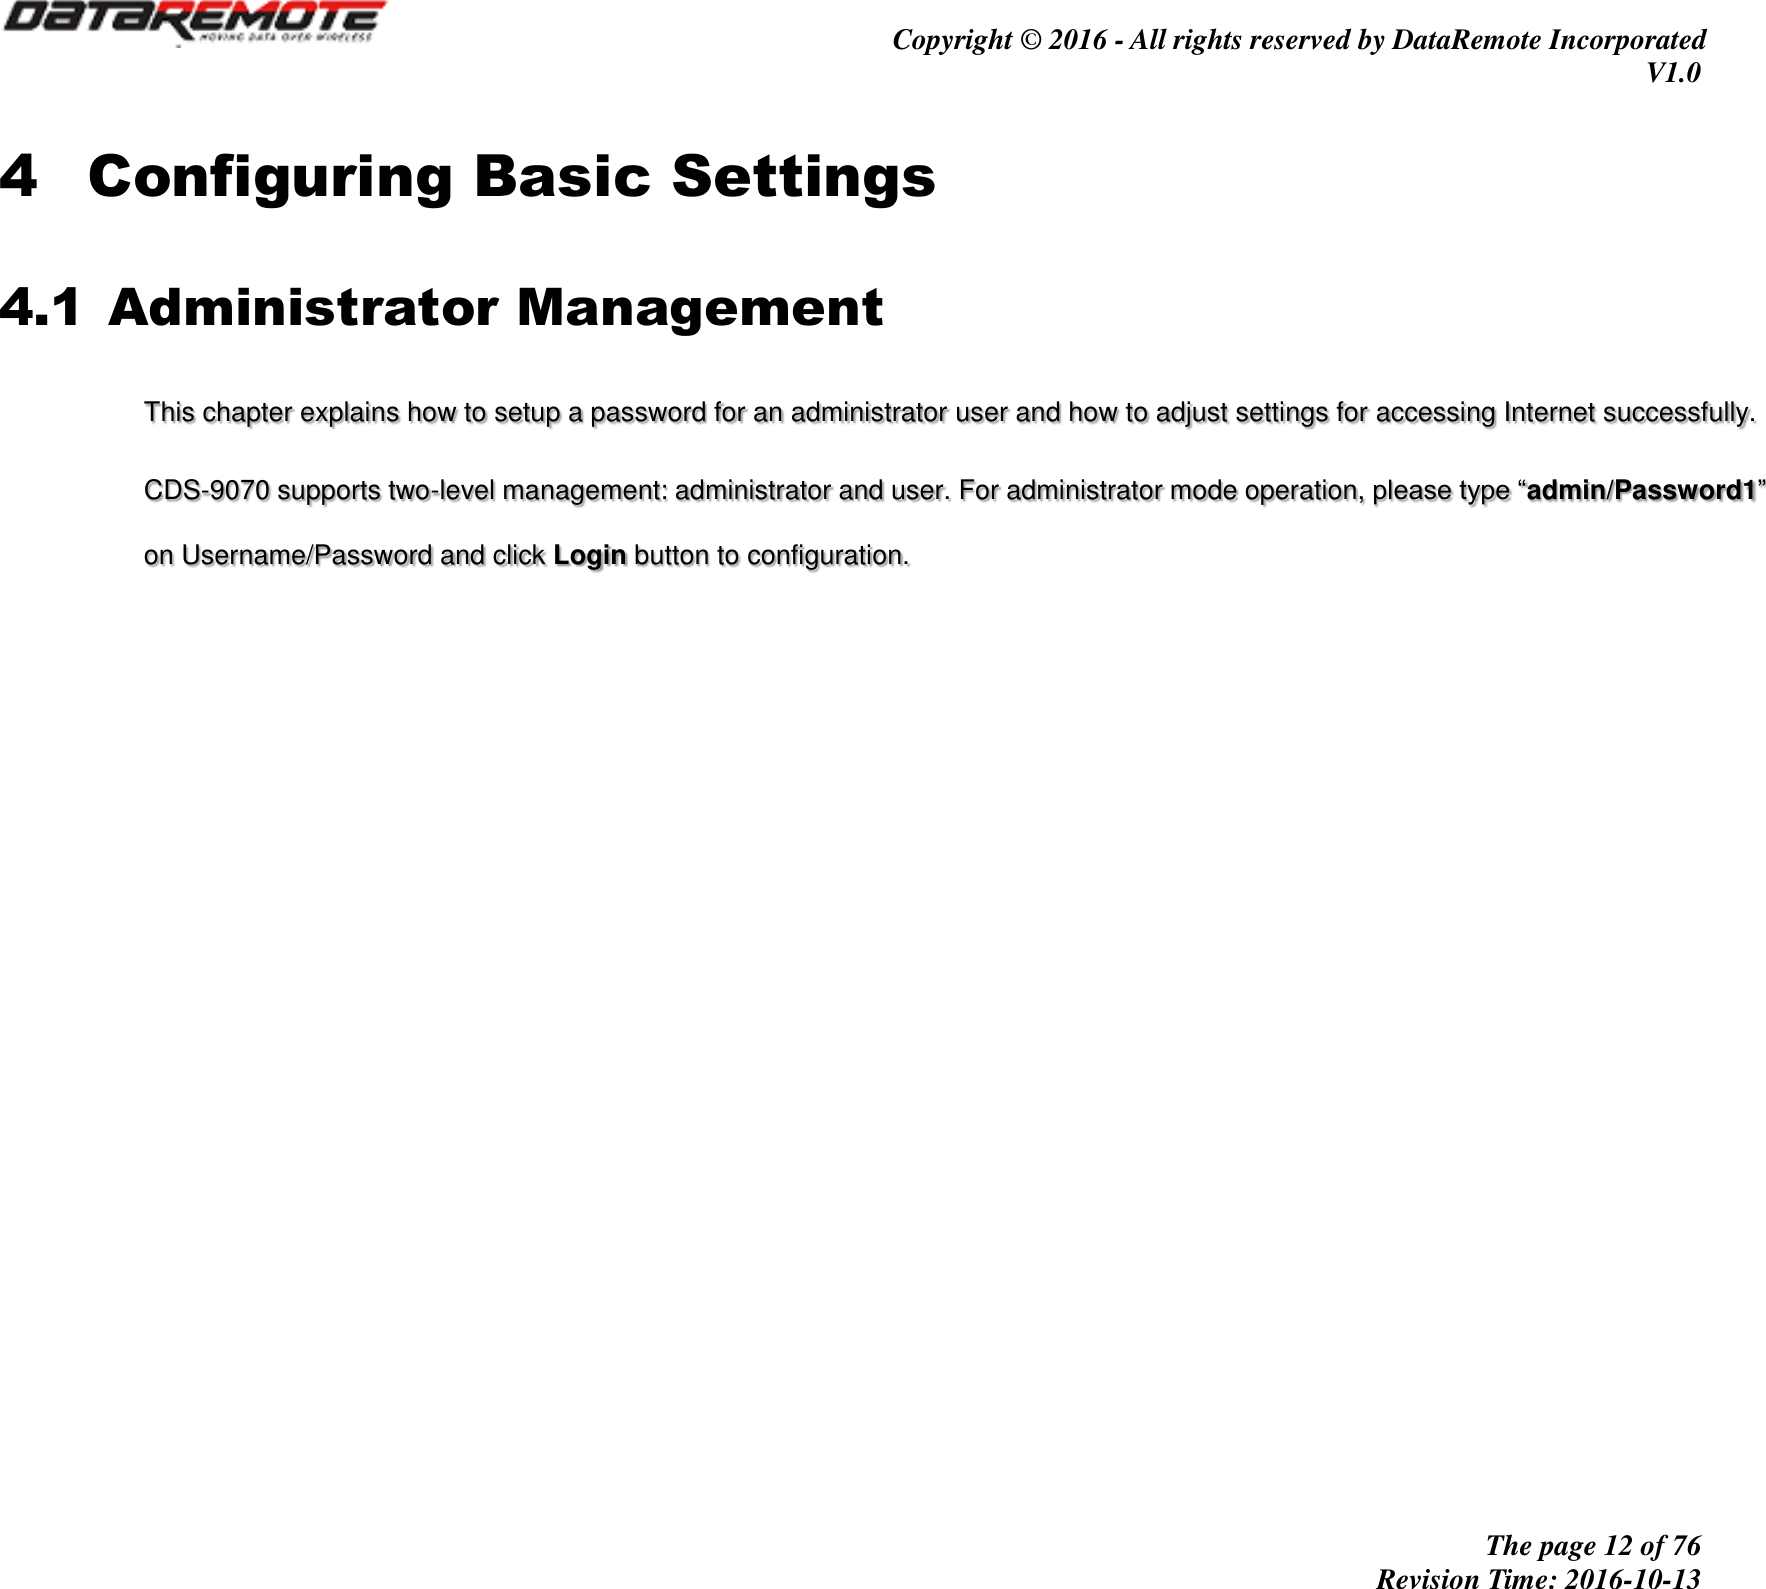                                         Copyright © 2016 - All rights reserved by DataRemote Incorporated V1.0                                                          The page 12 of 76 Revision Time: 2016-10-13     4 Configuring Basic Settings 4.1 Administrator Management This chapter explains how to setup a password for an administrator user and how to adjust settings for accessing Internet successfully.  CDS-9070 supports two-level management: administrator and user. For administrator mode operation, please type “admin/Password1” on Username/Password and click Login button to configuration.      